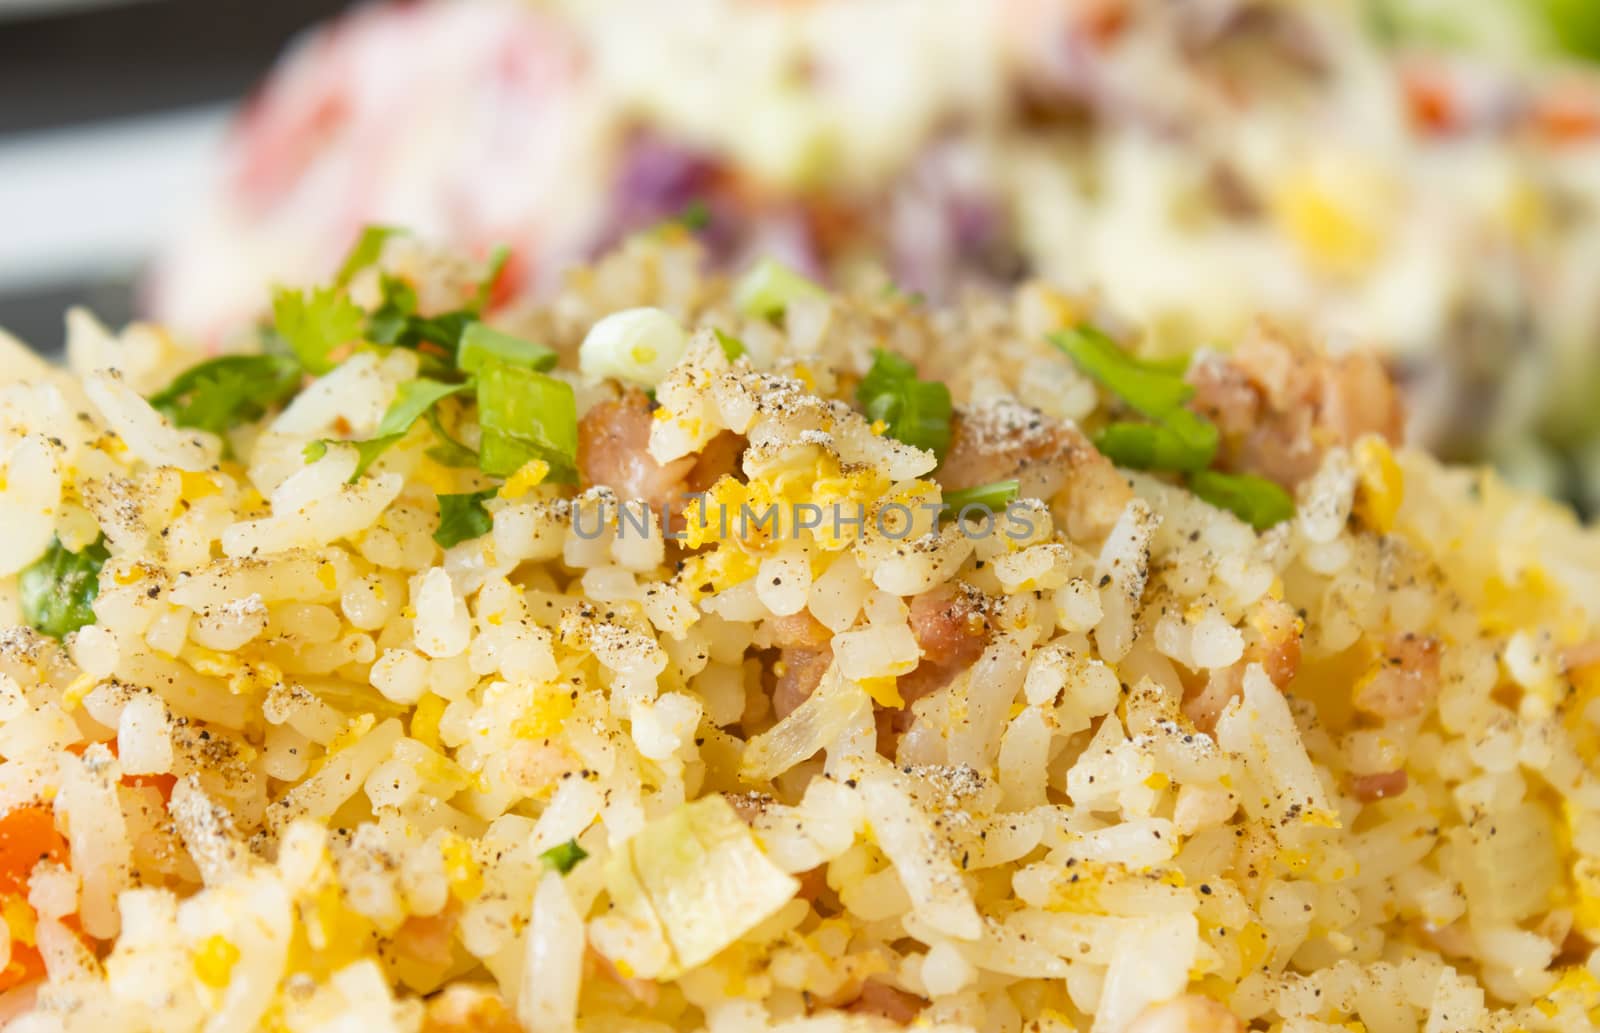 Thai Sour Pork Fried Rice and Salad in Dish with Natural Light in Close Up View